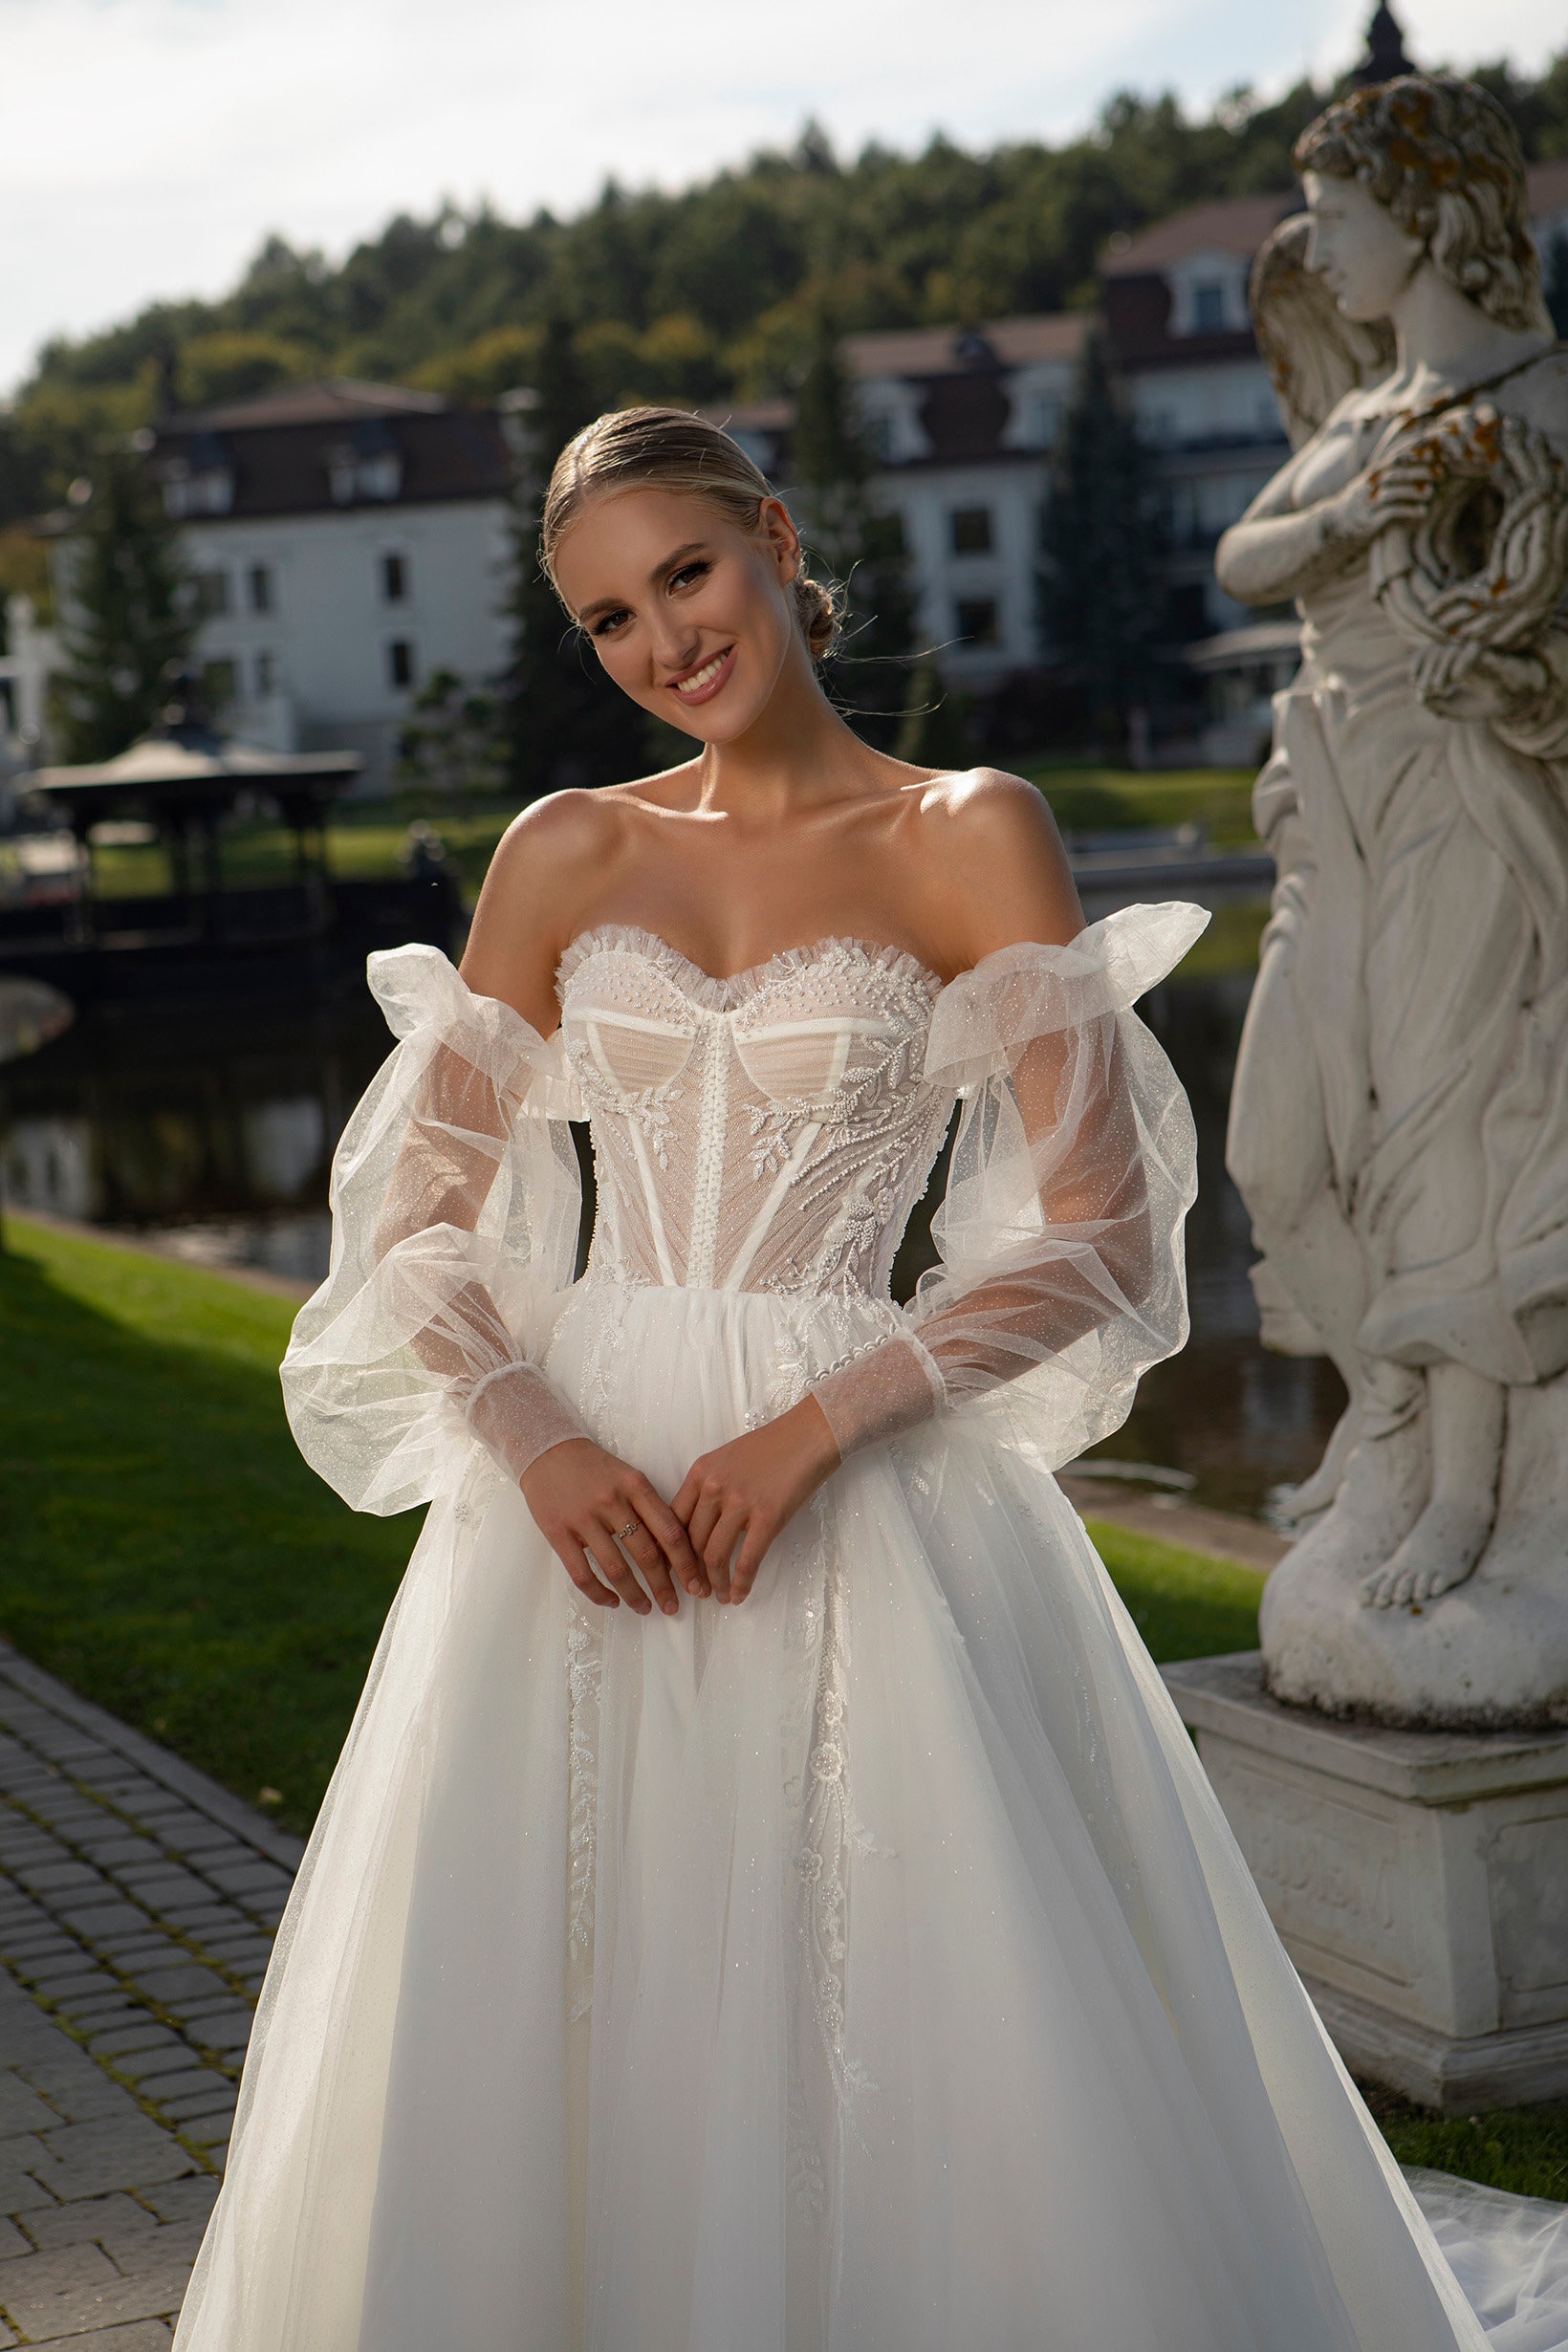 Strapless Sweetheart Neckline A-line Wedding Dress With Detachable Sleeves  And Floral Details